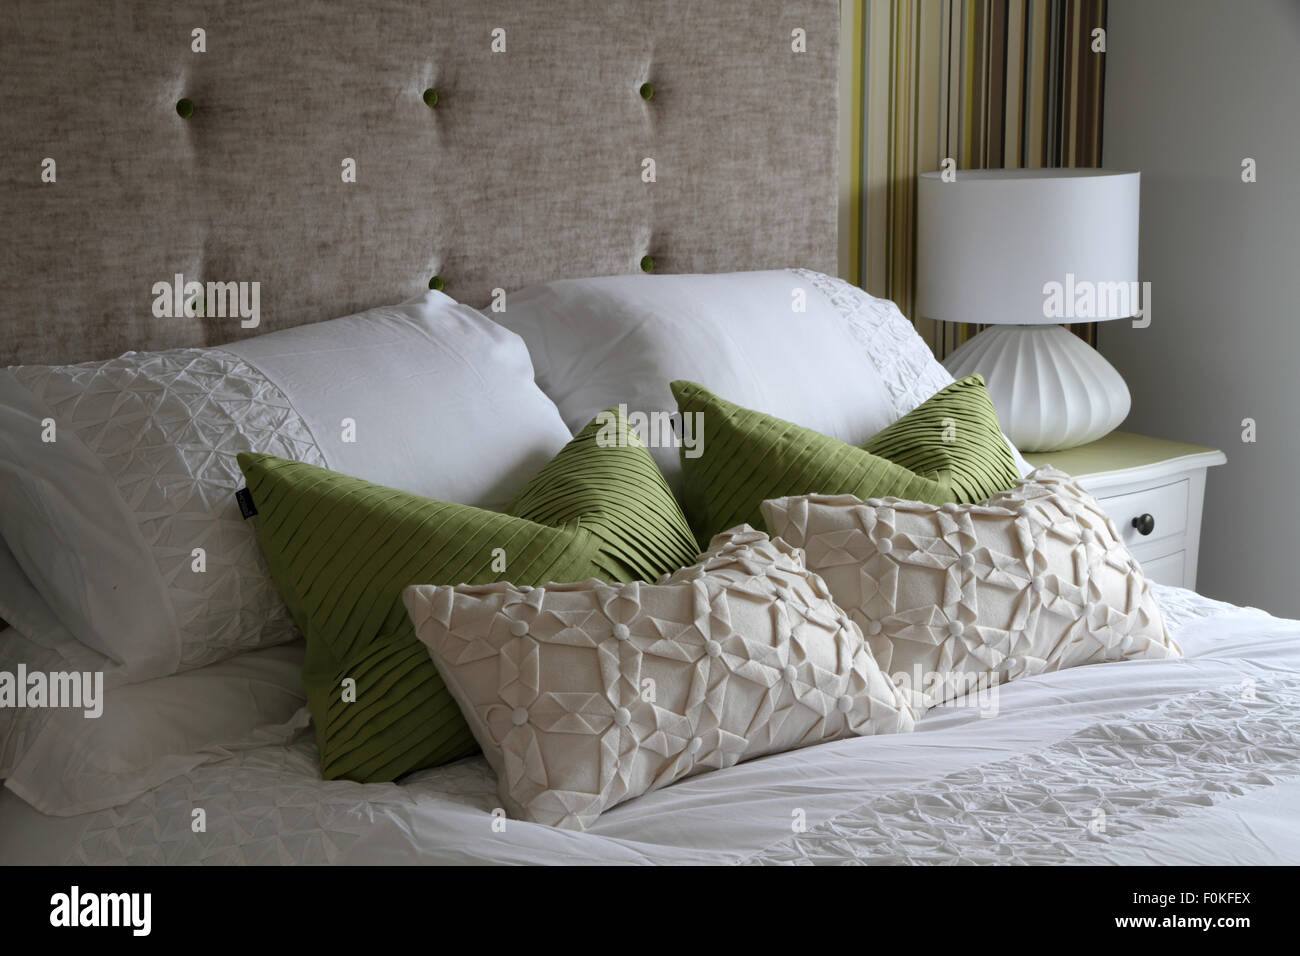 Bed with pillows, cushions and bedside lamp Stock Photo